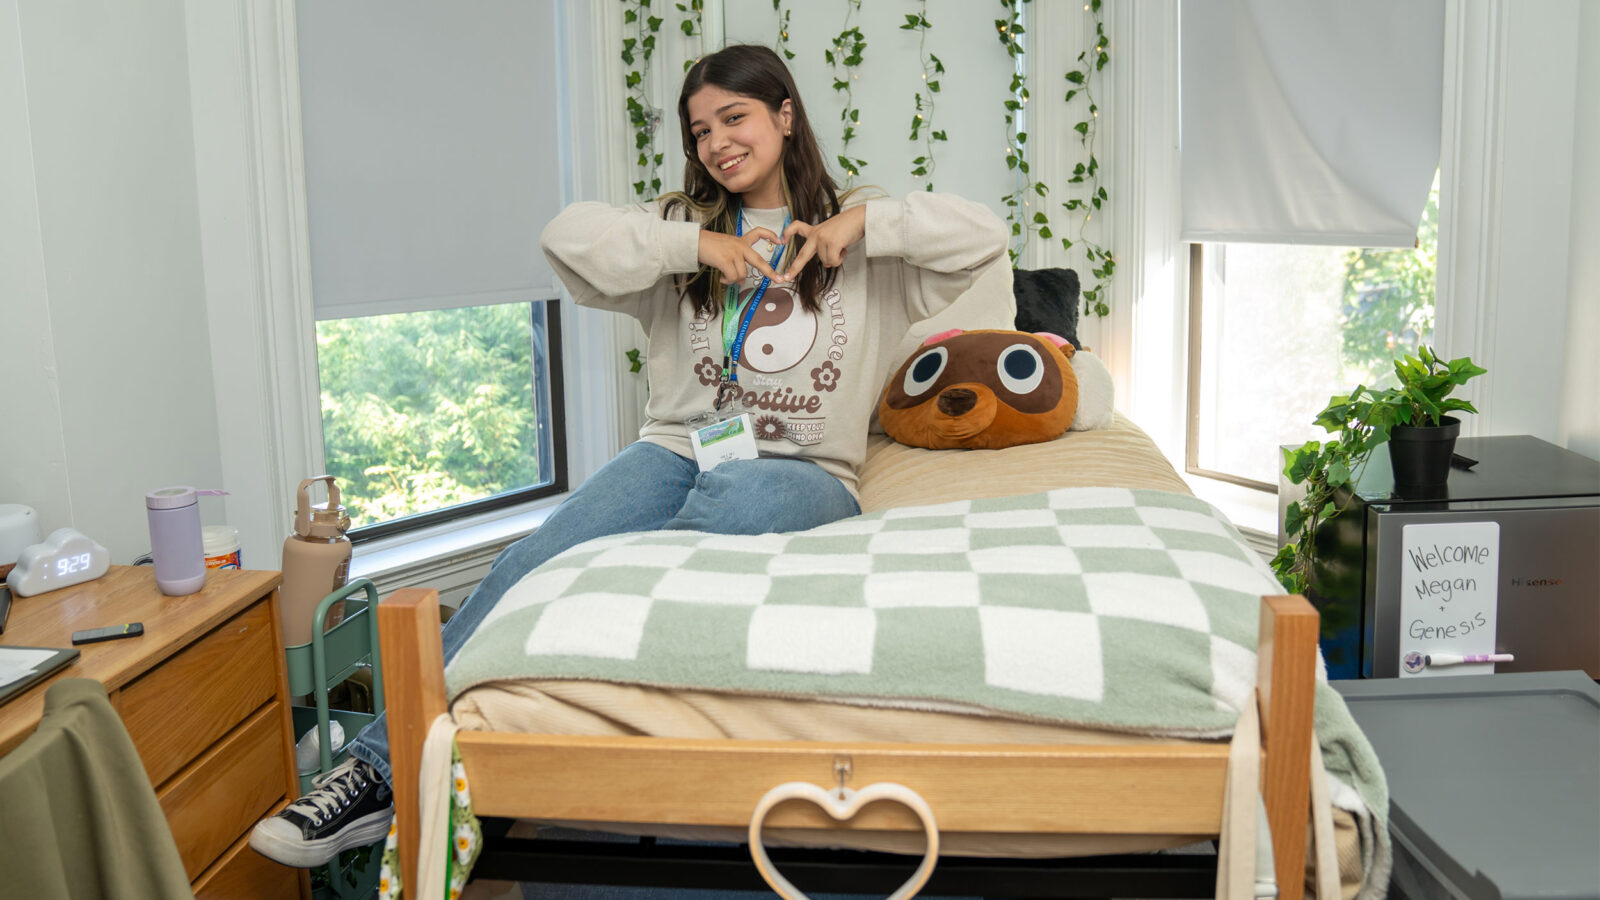 student makes a heart shape with their hands while sitting on their twin bed in a residence hall